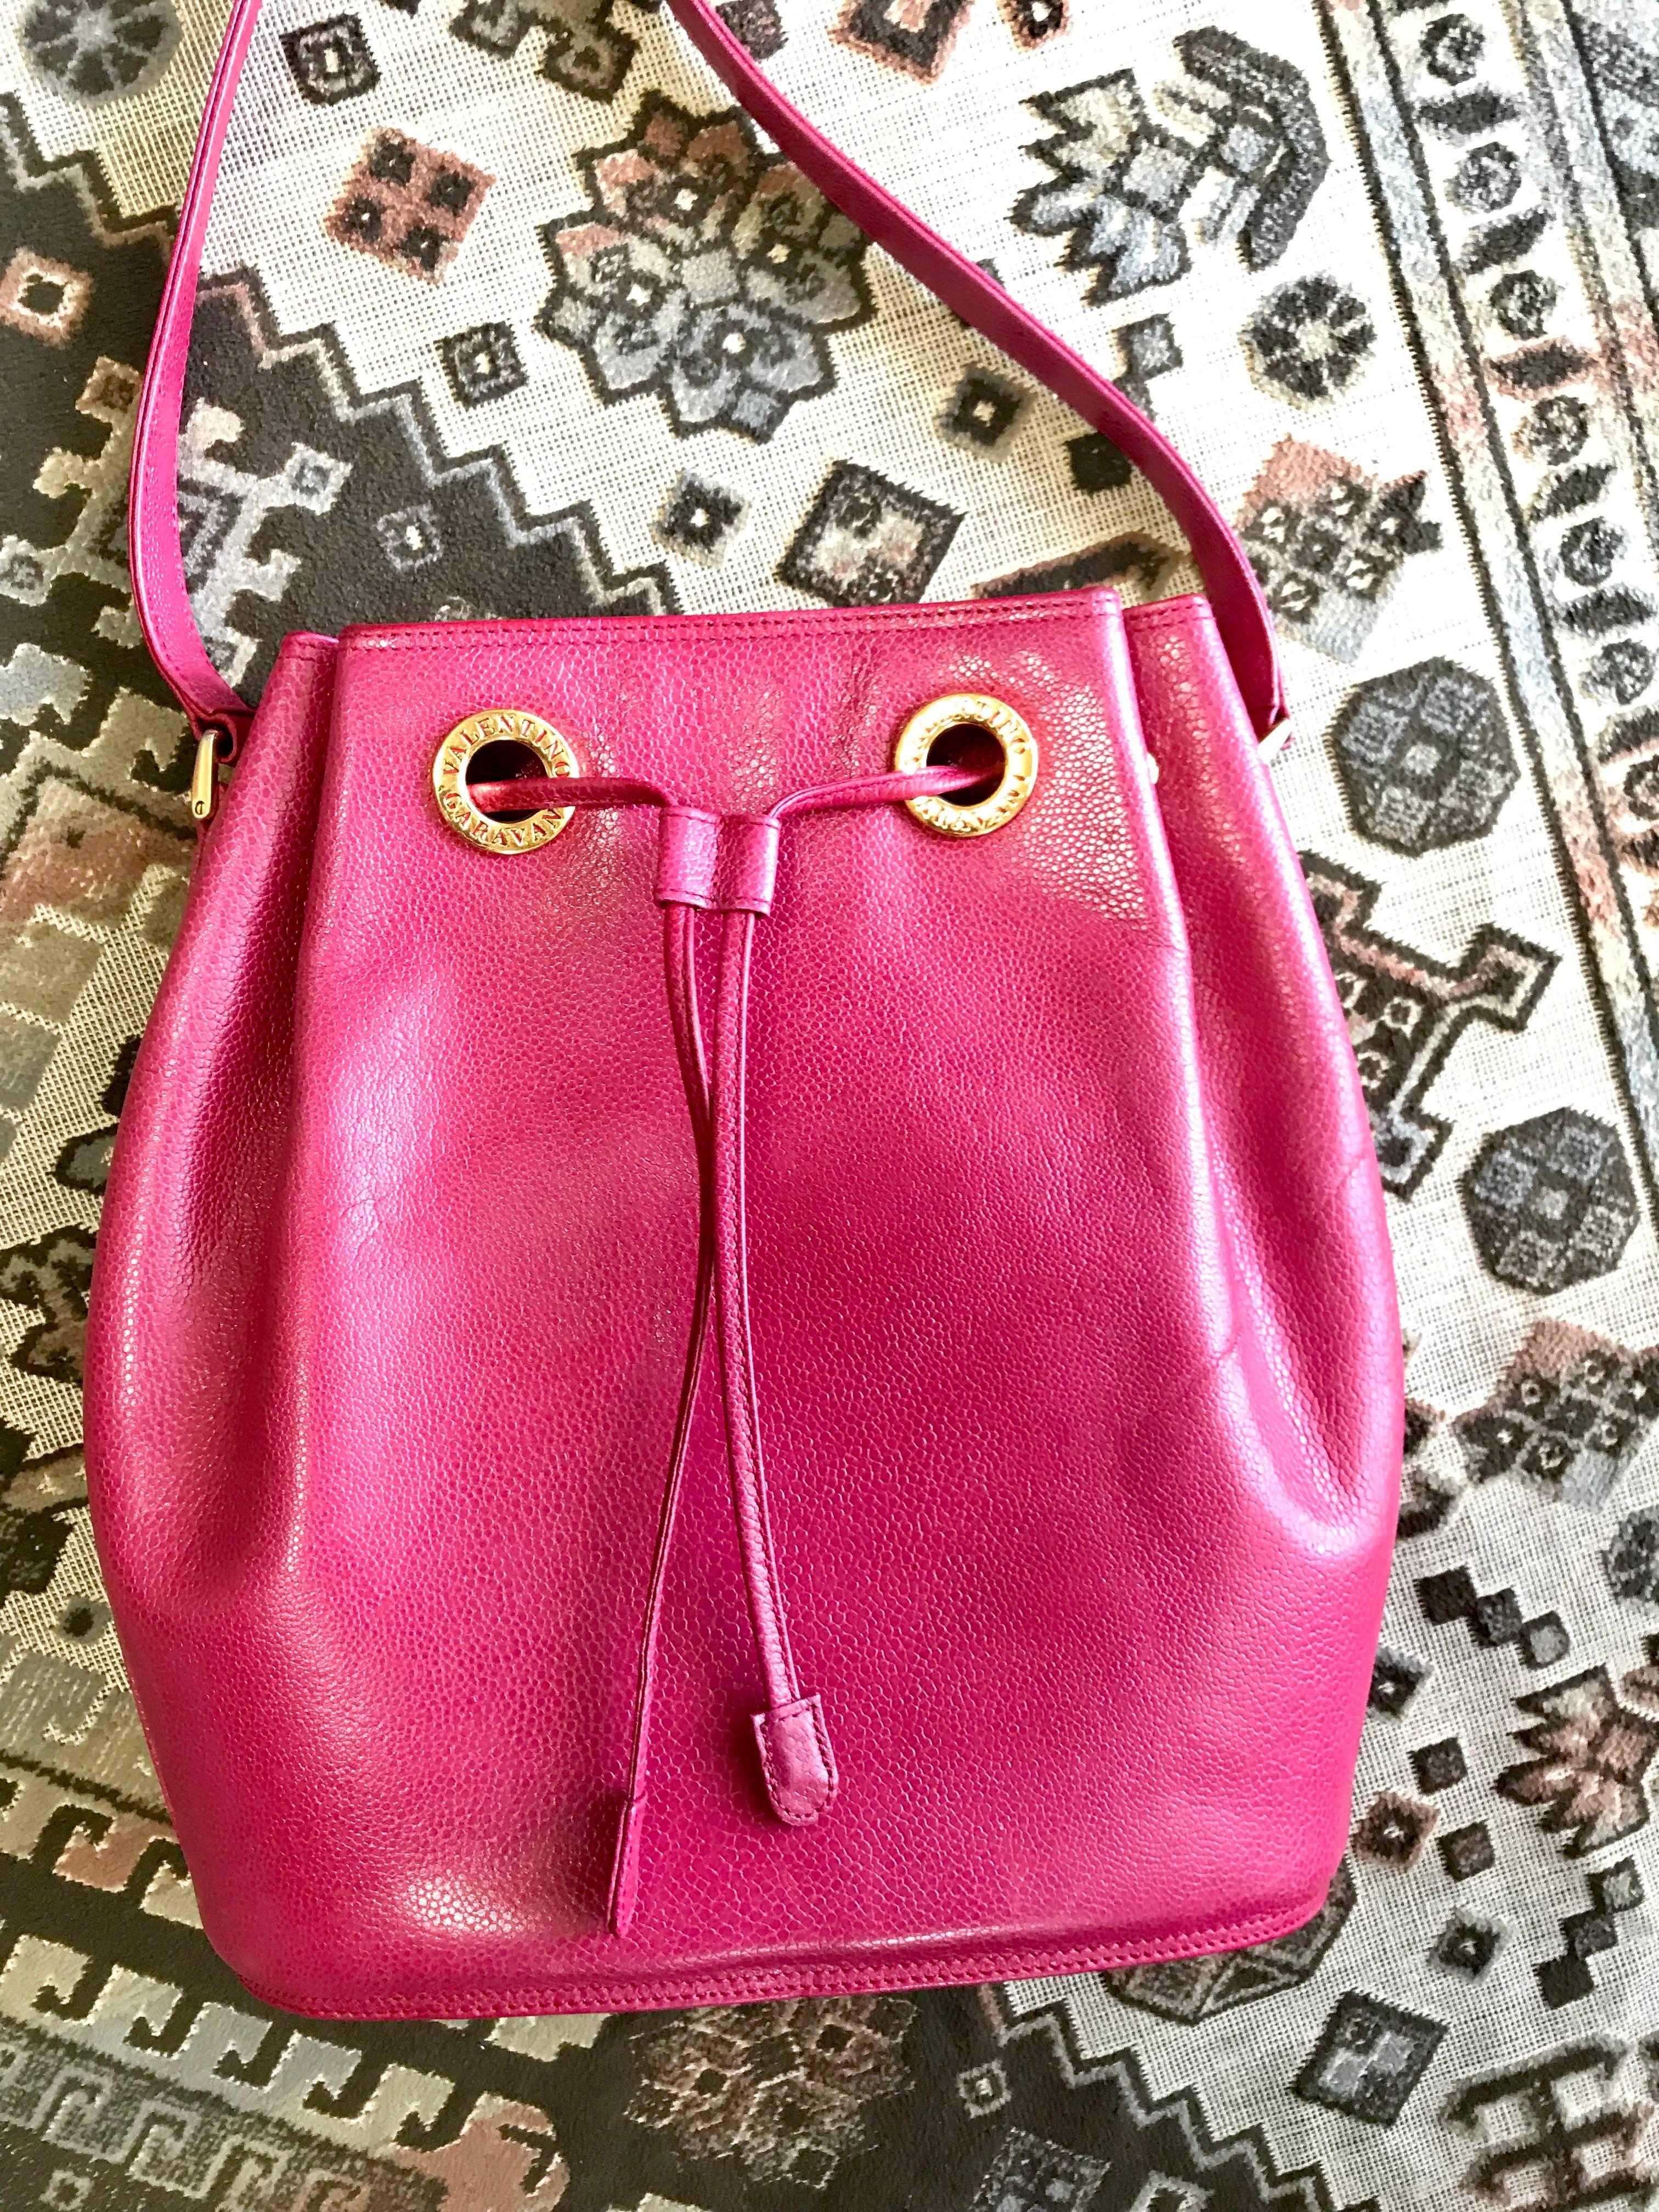 1990s. Vintage Valentino Garavani pink caviarskin type leather hobo bucket shoulder bag with round logo motifs. 
Classic Valentino daily use purse.

Introducing another fabulous vintage shoulder bag from Valentino Garavani back in the 90's.

You